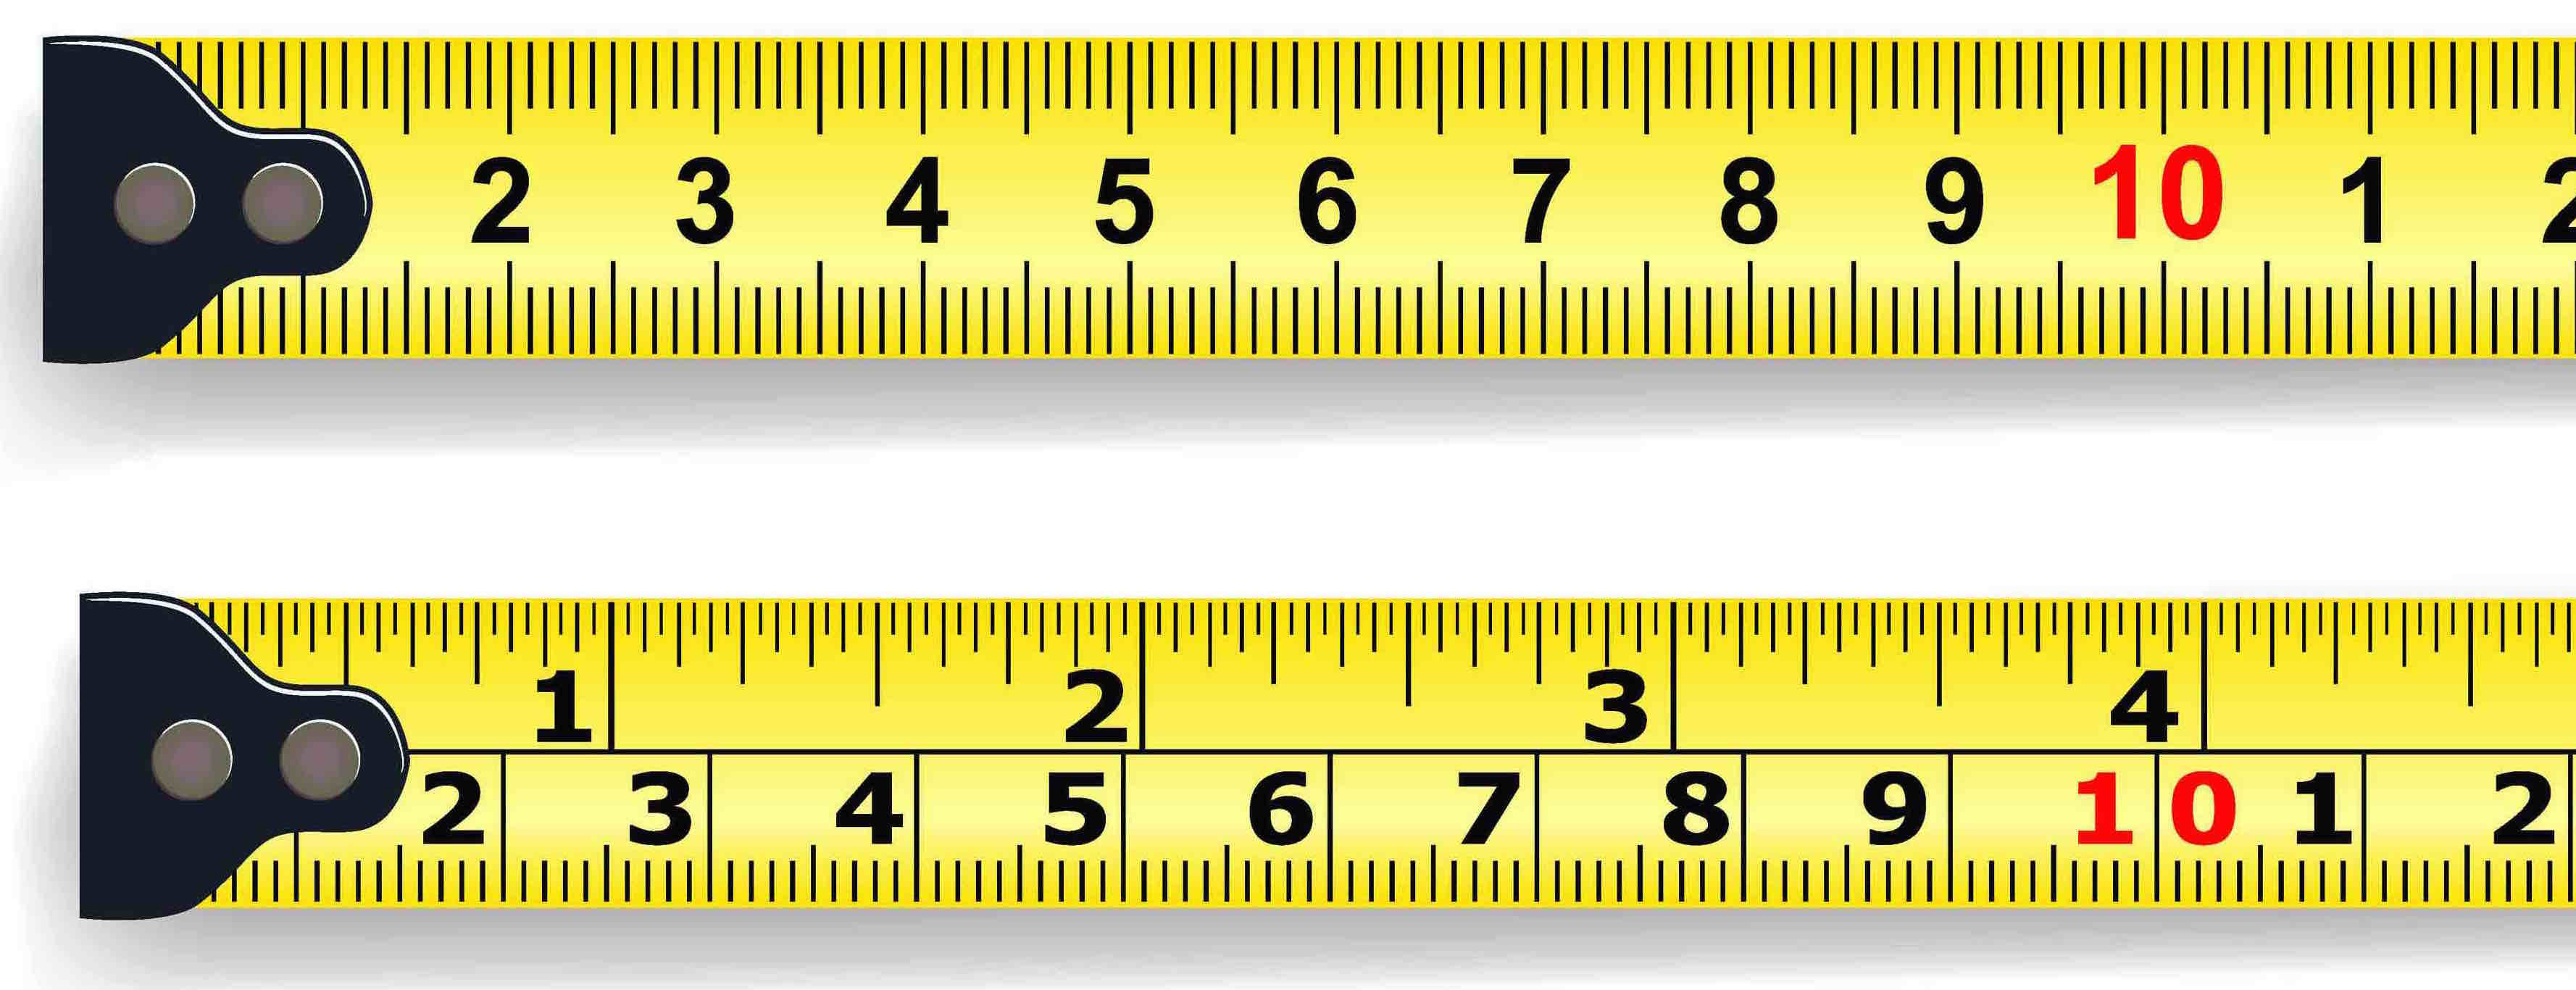 Tips & Tricks: Selecting a Measurement System